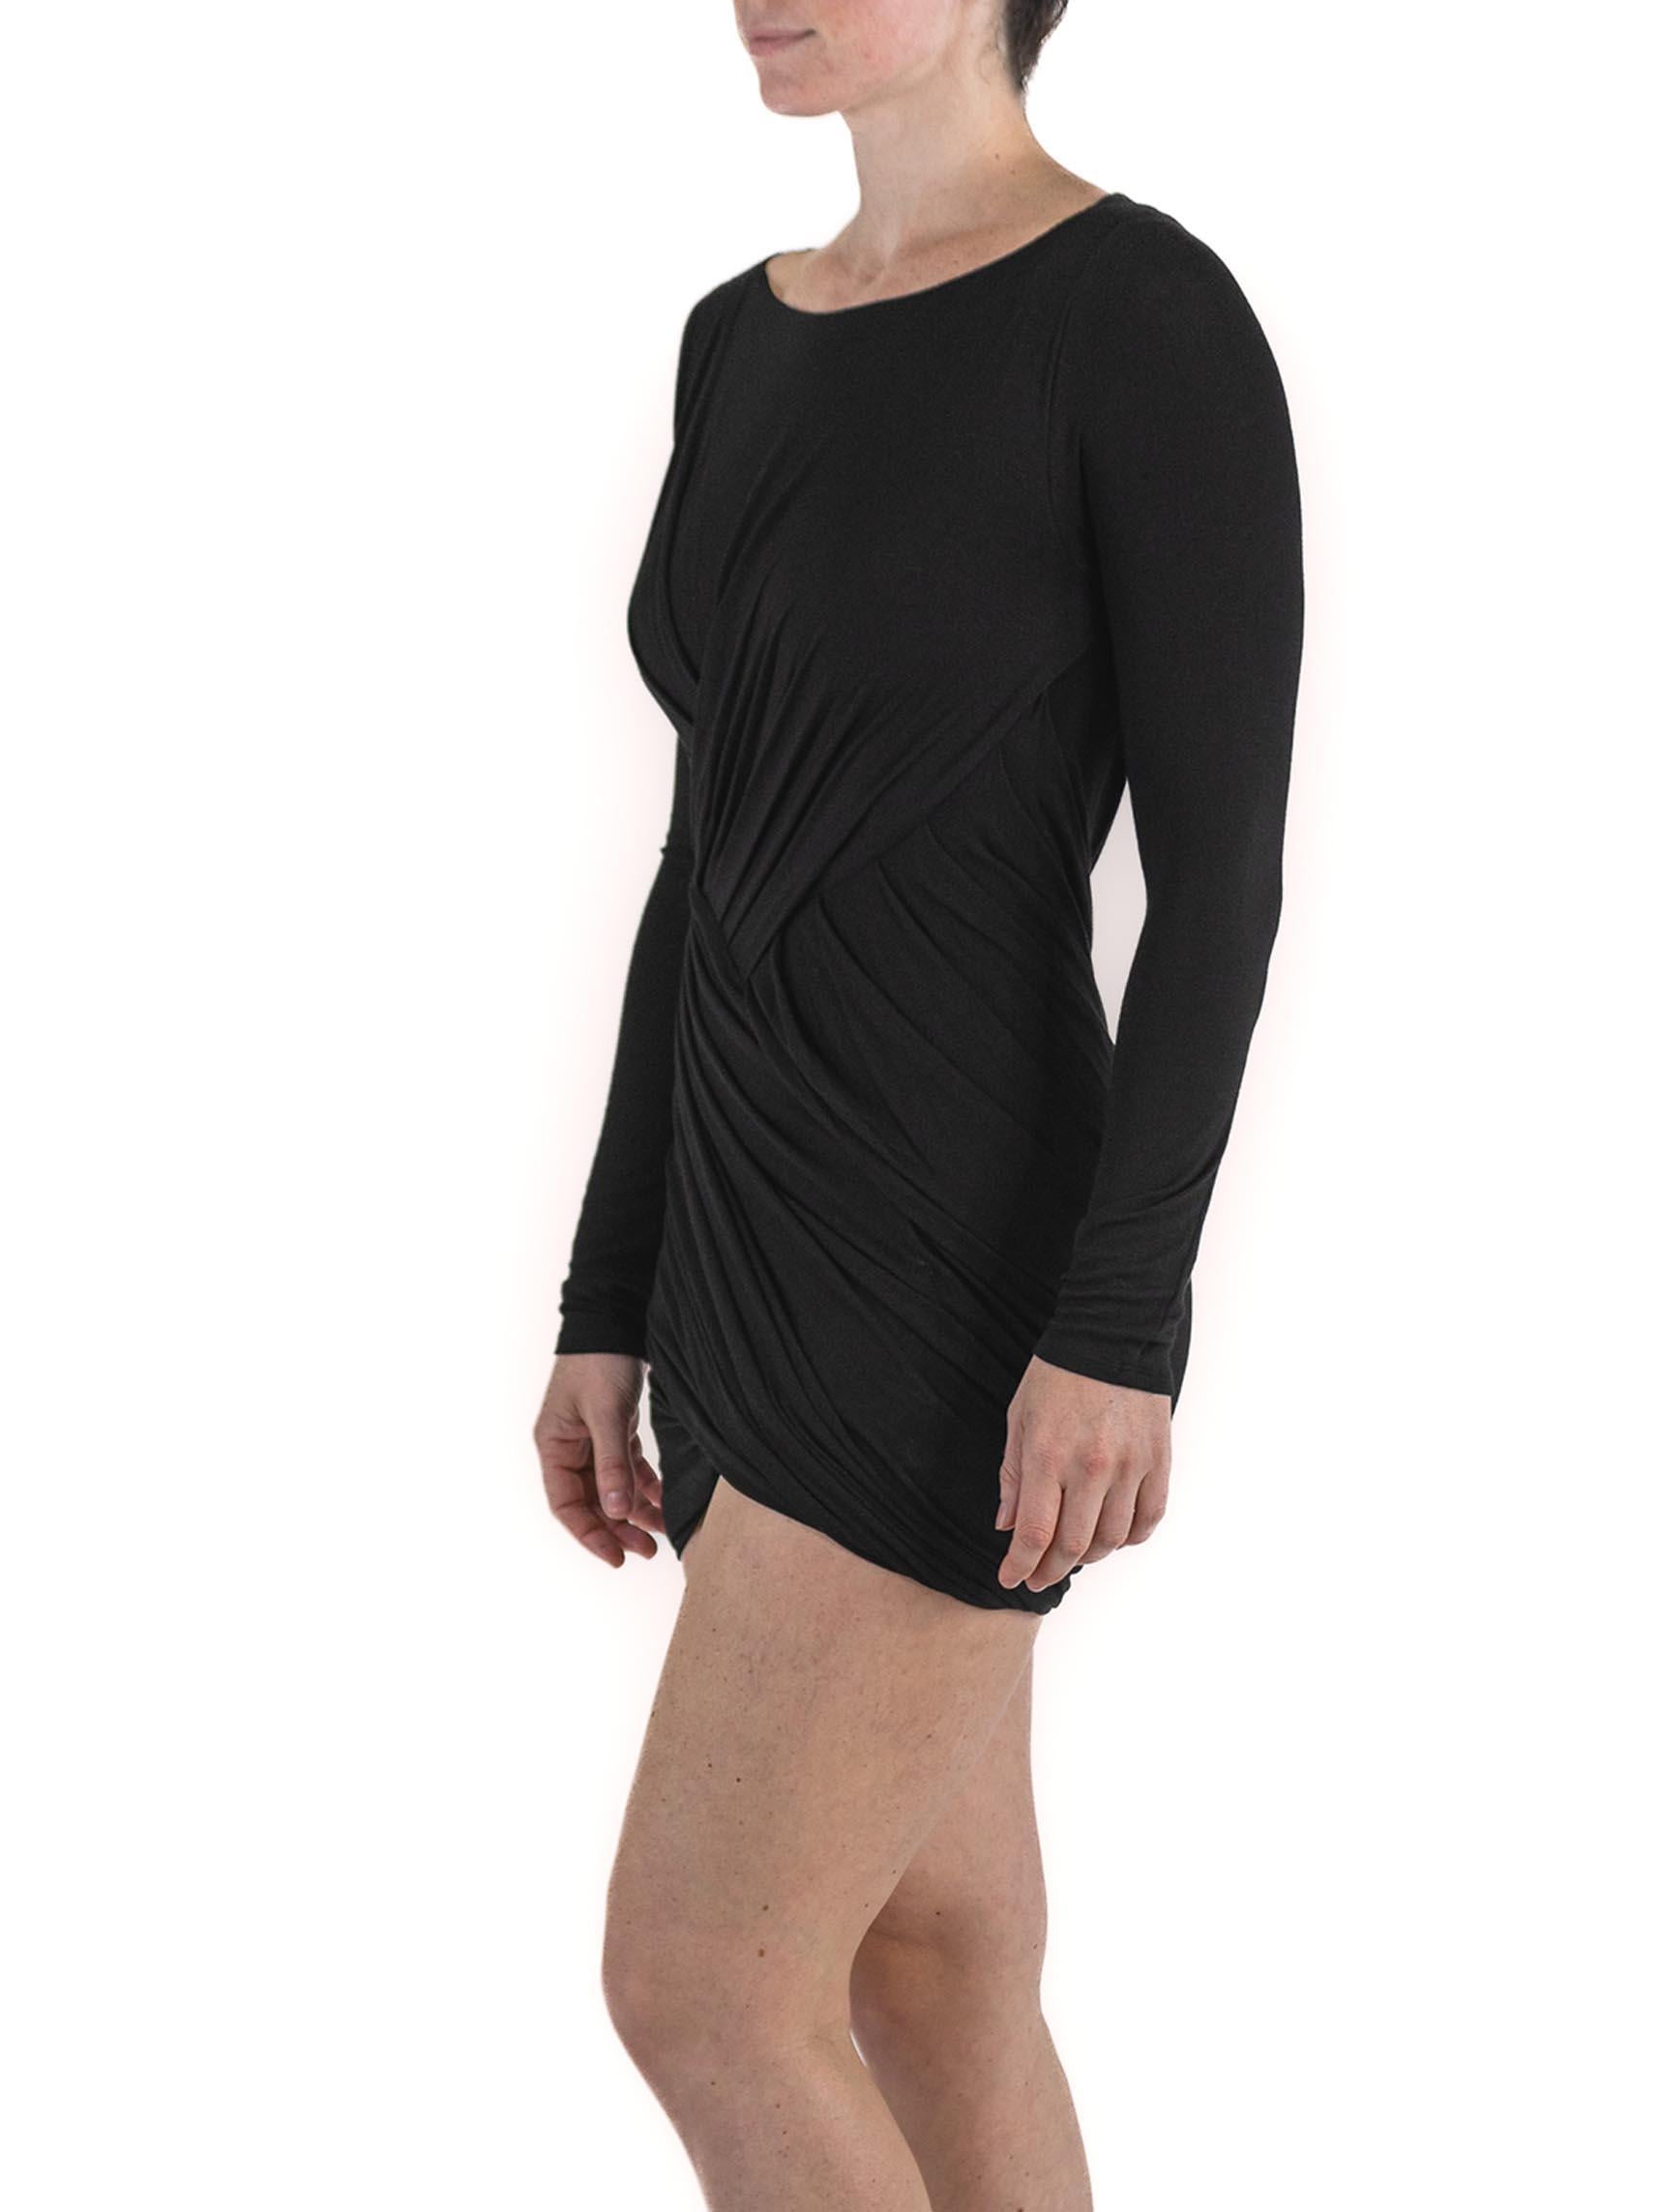 Women's 2000S DONNA KARAN Black Rayon Jersey Dress With Sleeves For Sale